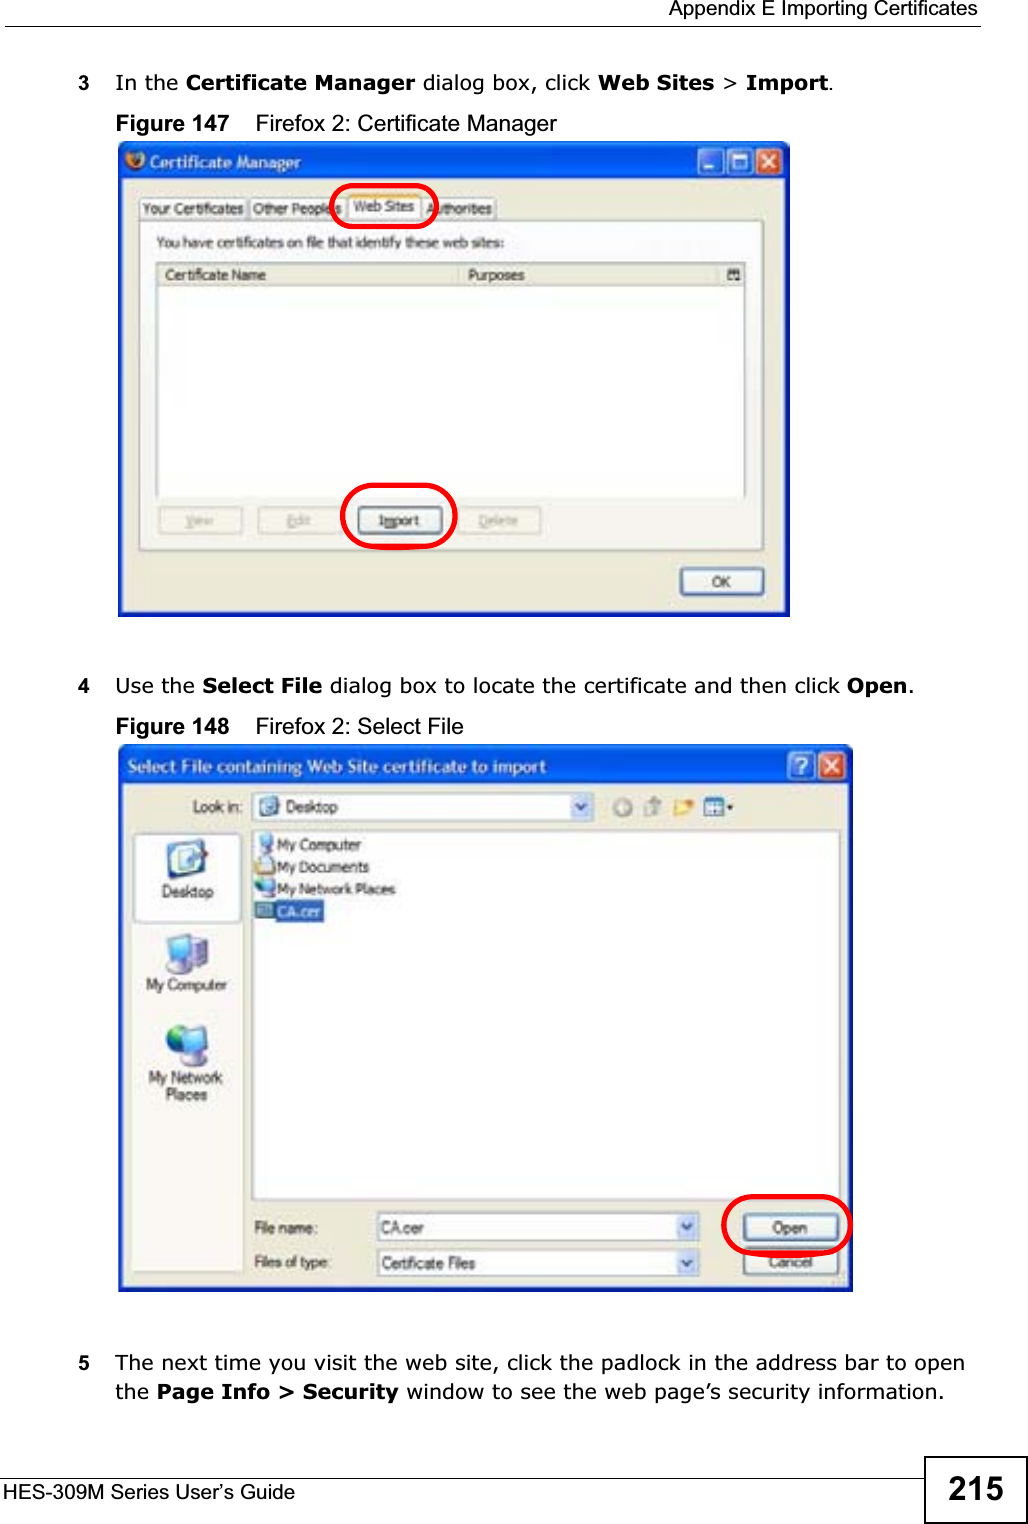  Appendix E Importing CertificatesHES-309M Series User’s Guide 2153In the Certificate Manager dialog box, click Web Sites &gt; Import.Figure 147    Firefox 2: Certificate Manager4Use the Select File dialog box to locate the certificate and then click Open.Figure 148    Firefox 2: Select File5The next time you visit the web site, click the padlock in the address bar to open the Page Info &gt; Security window to see the web page’s security information.